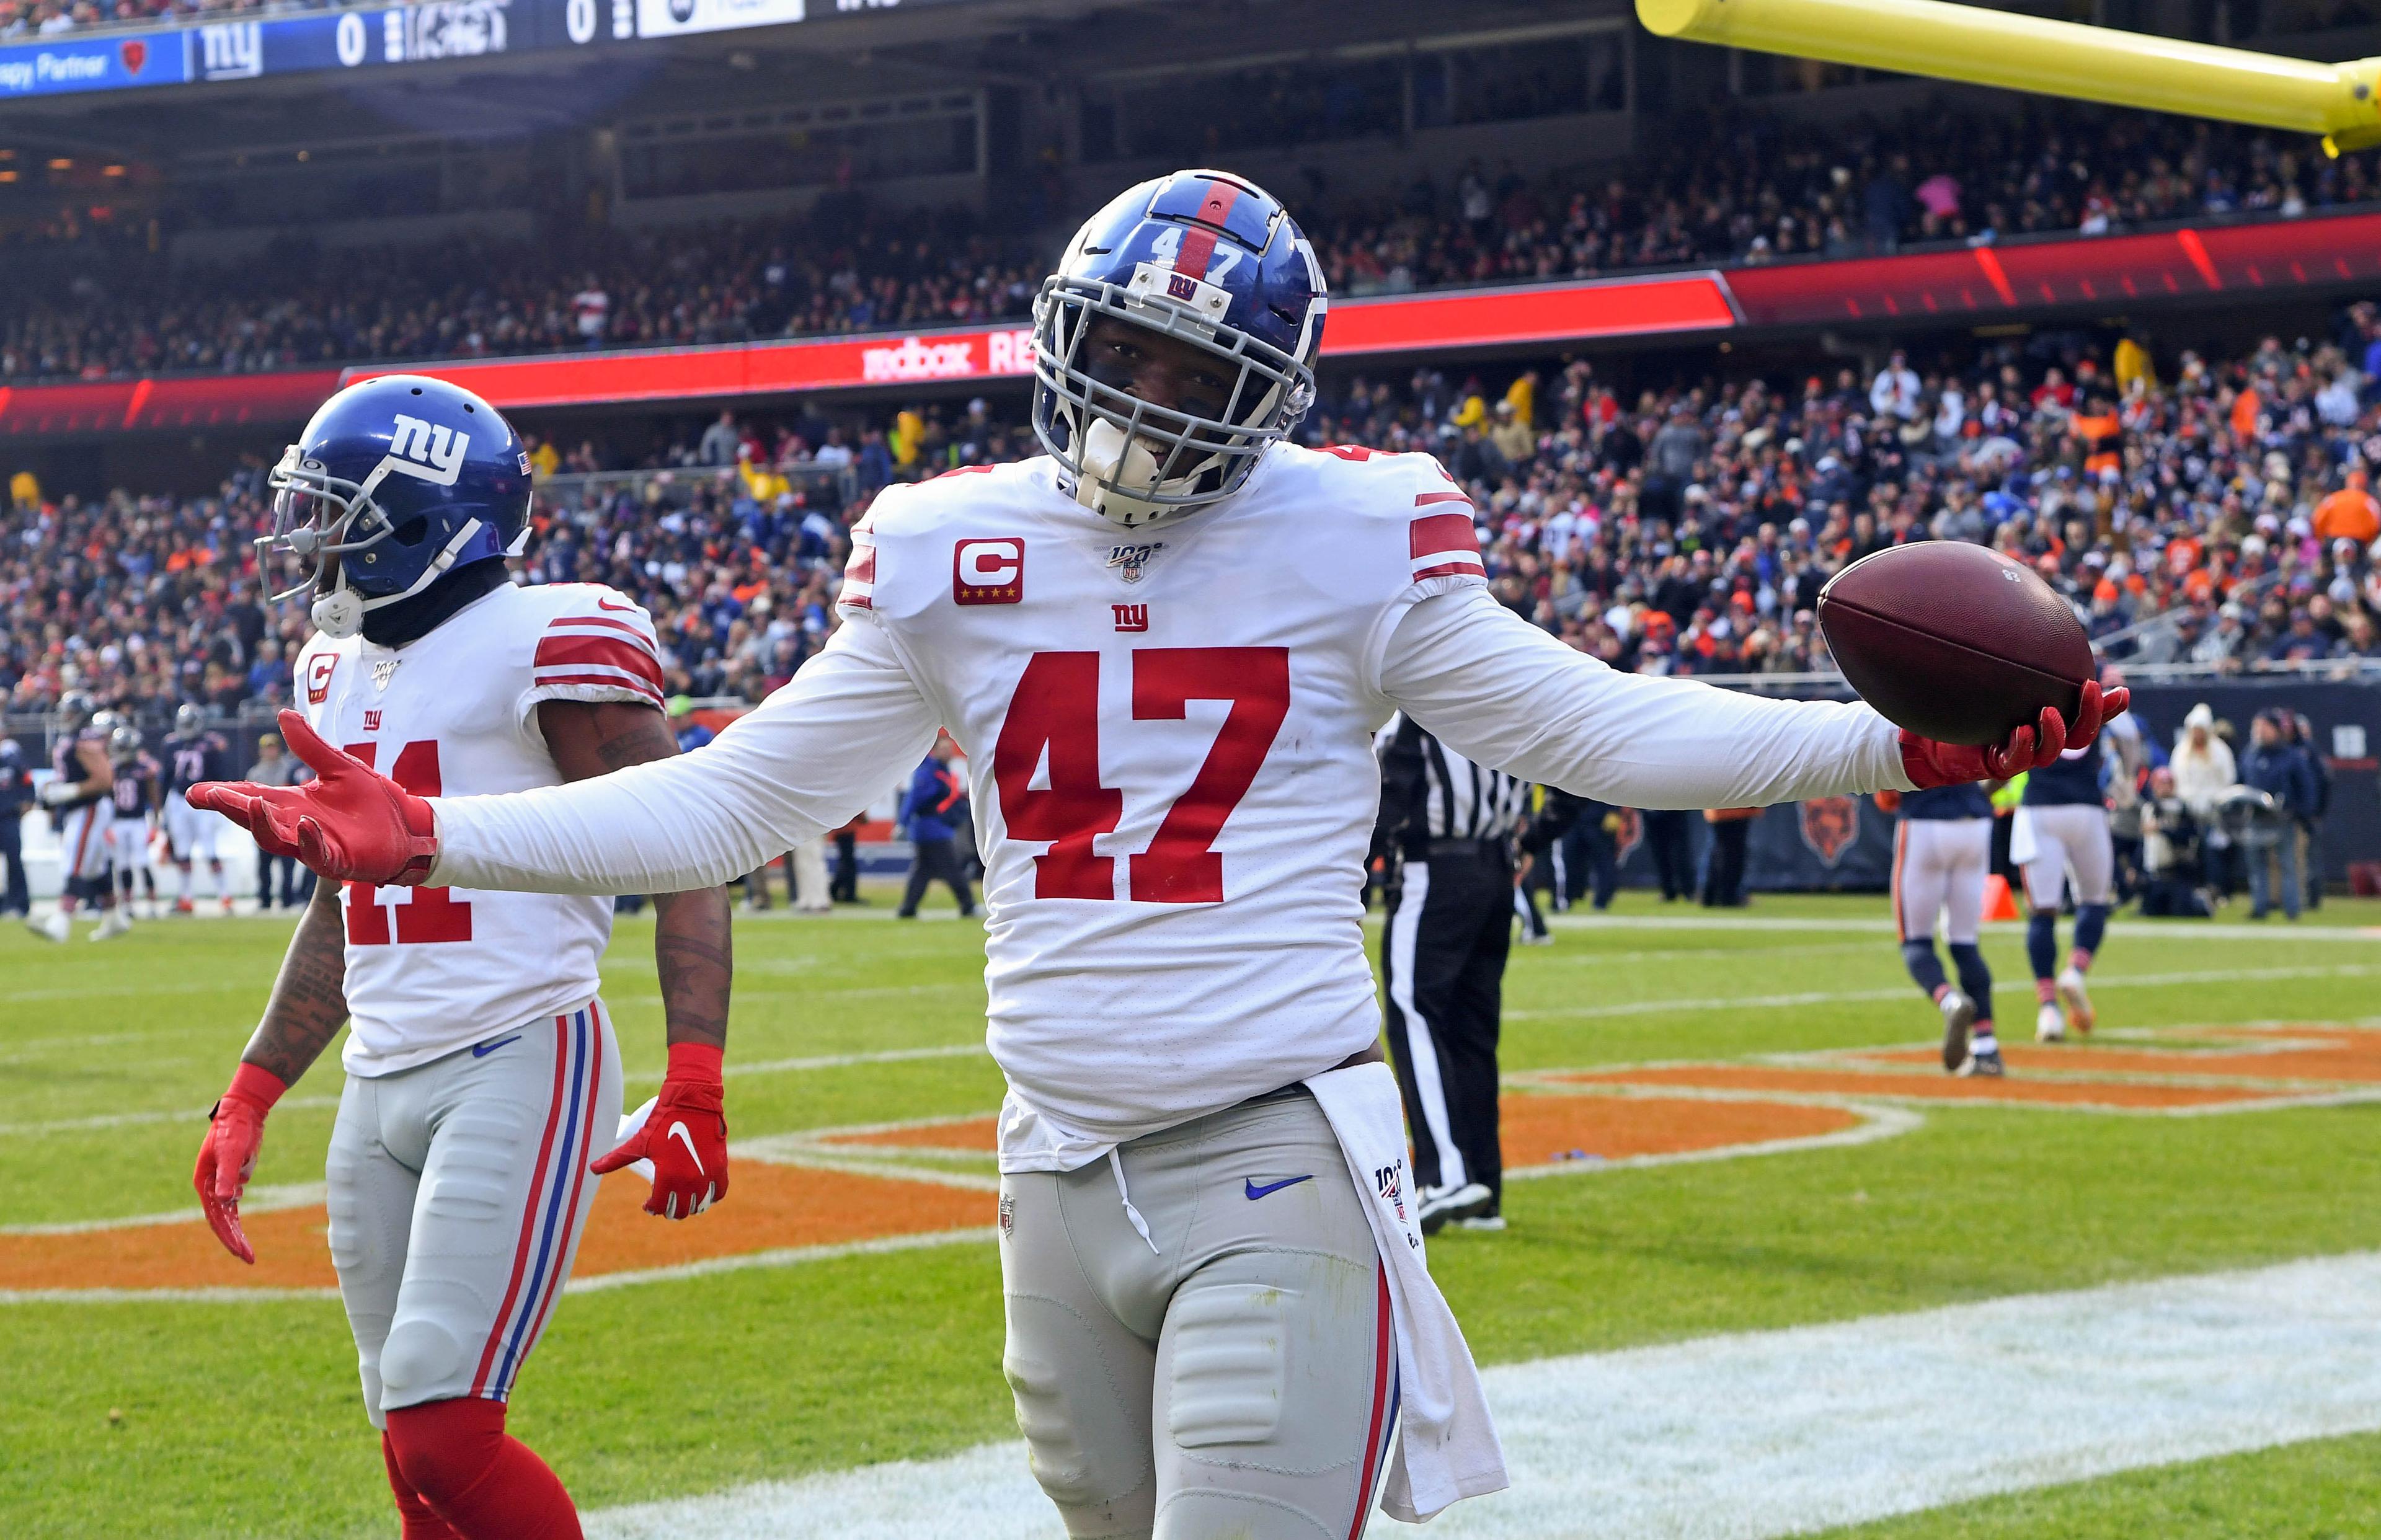 Nov 24, 2019; Chicago, IL, USA; New York Giants outside linebacker Alec Ogletree (47) reacts after making an interception against the Chicago Bears during the first quarter at Soldier Field. Mandatory Credit: Mike DiNovo-USA TODAY Sports / Mike DiNovo-USA TODAY Sports